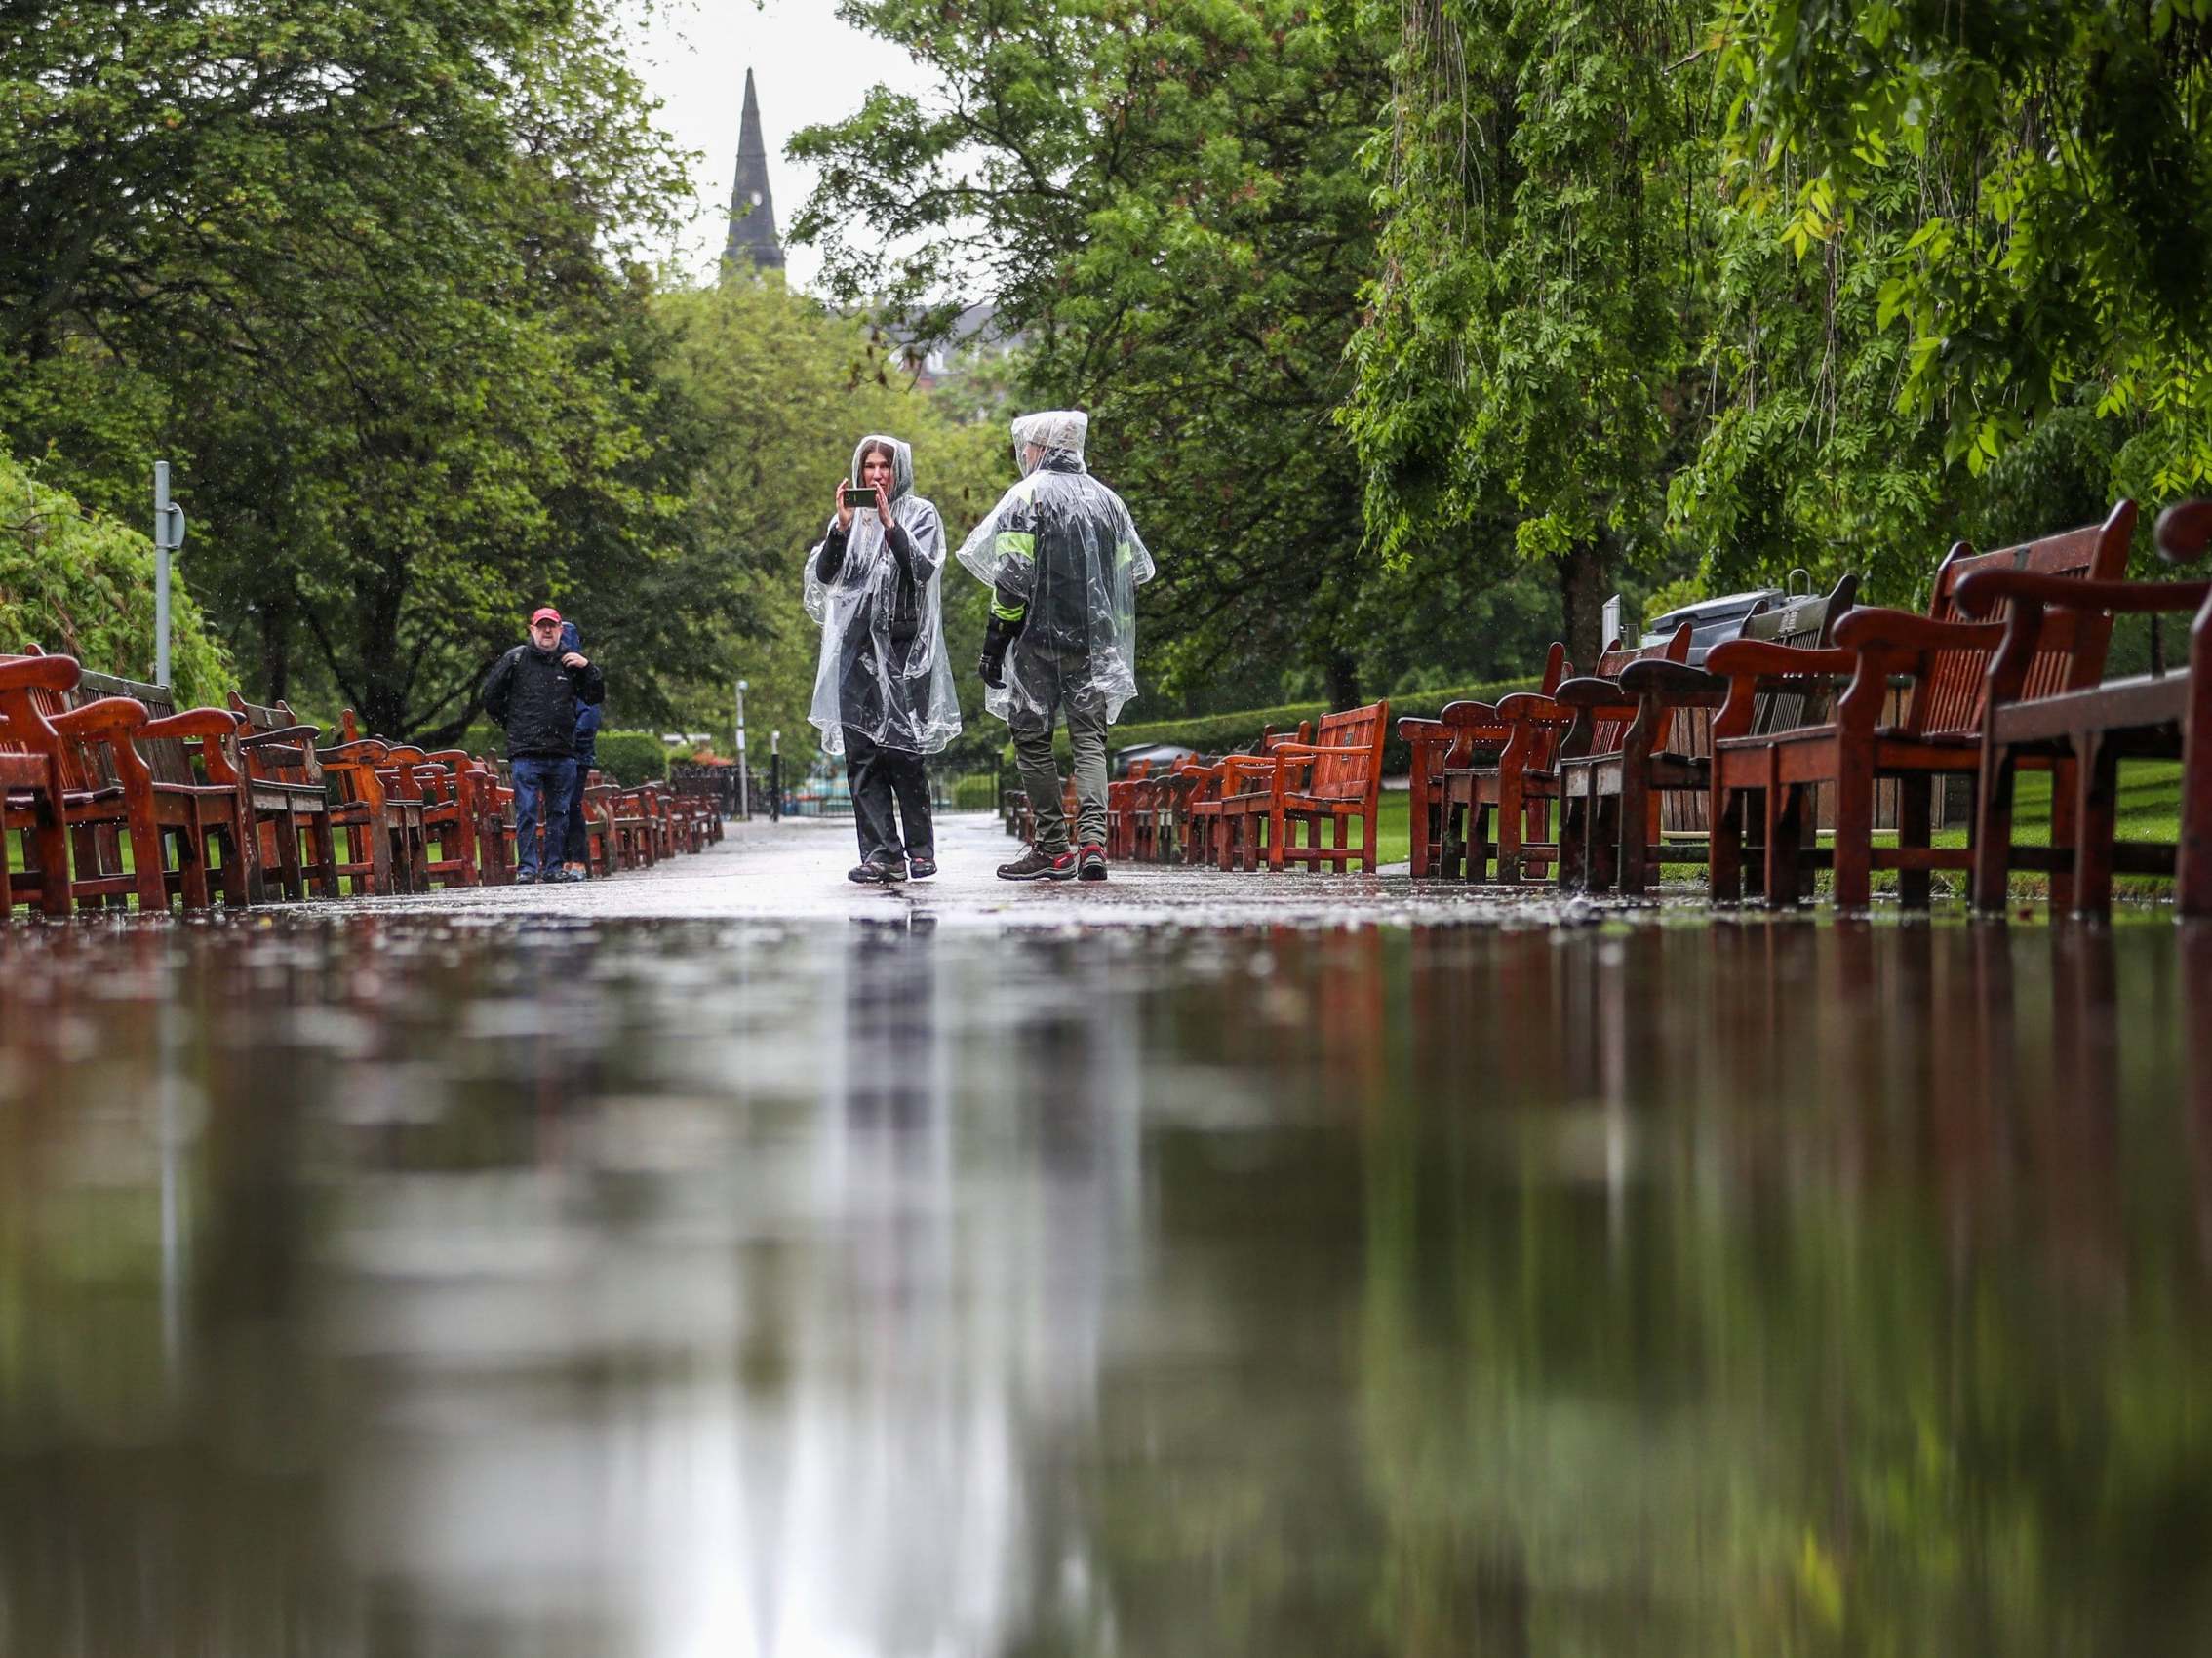 A flooded footpath in Edinburgh's Princes Street Gardens; the downpours caught many tourists by surprise